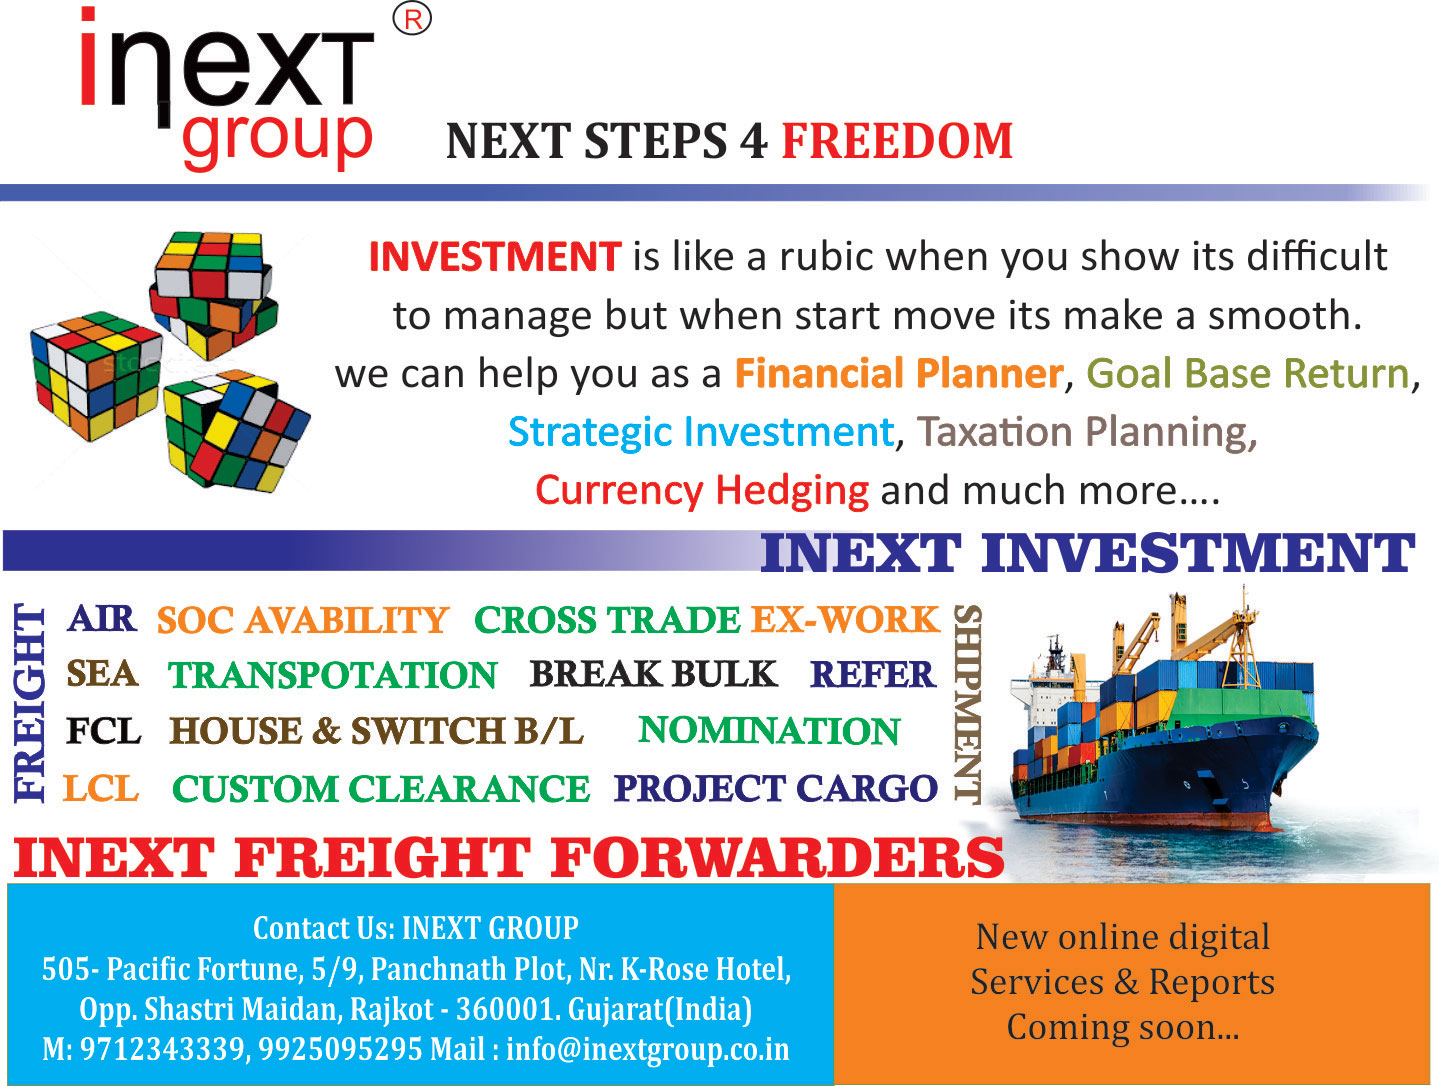 iNext Group